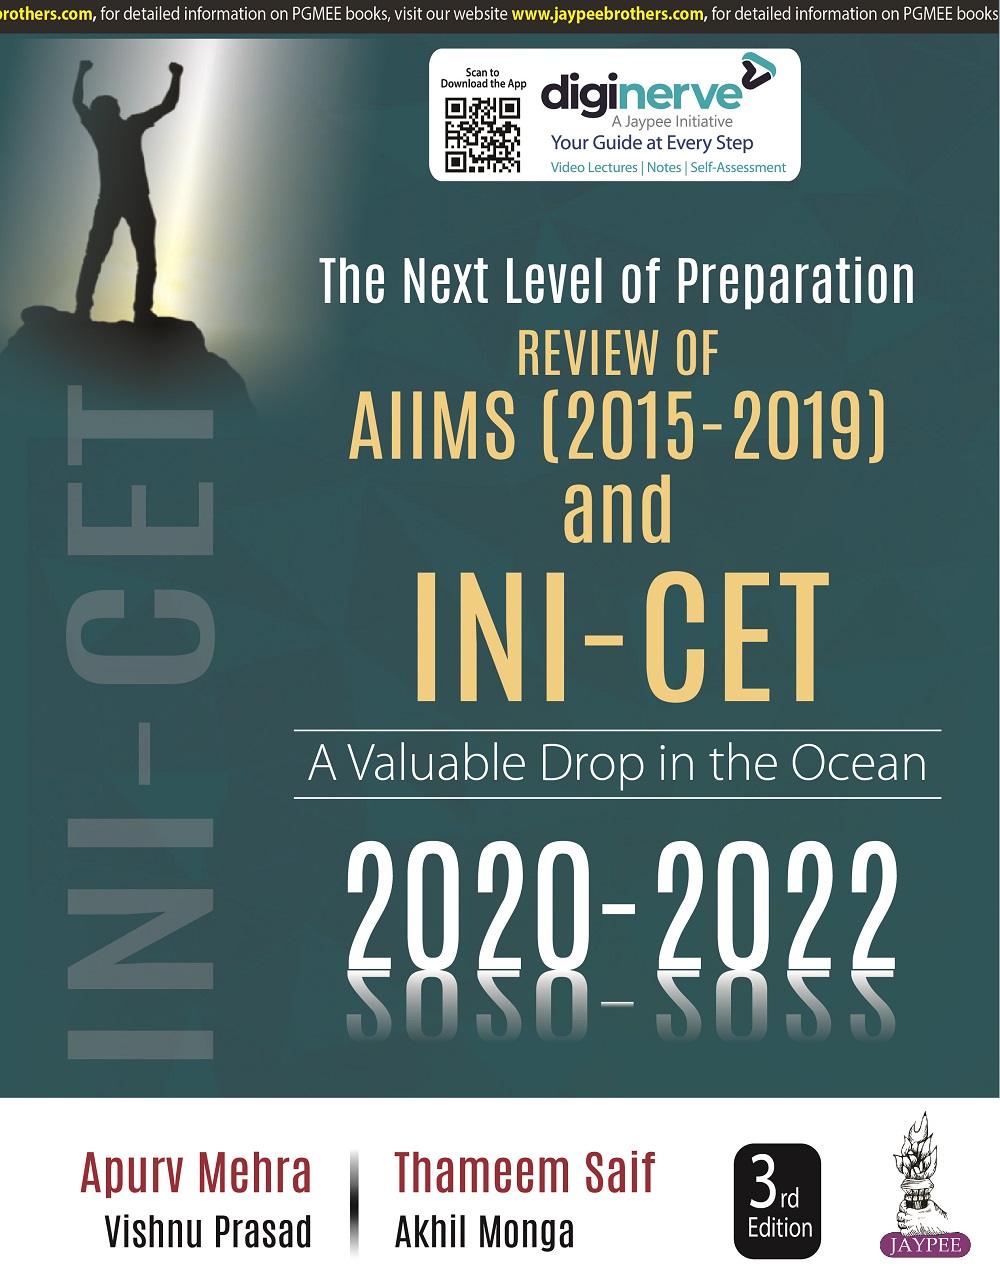 The Next Level of Preparation Review of AIIMS (2015-2019) and INI-CET (2020-2022)